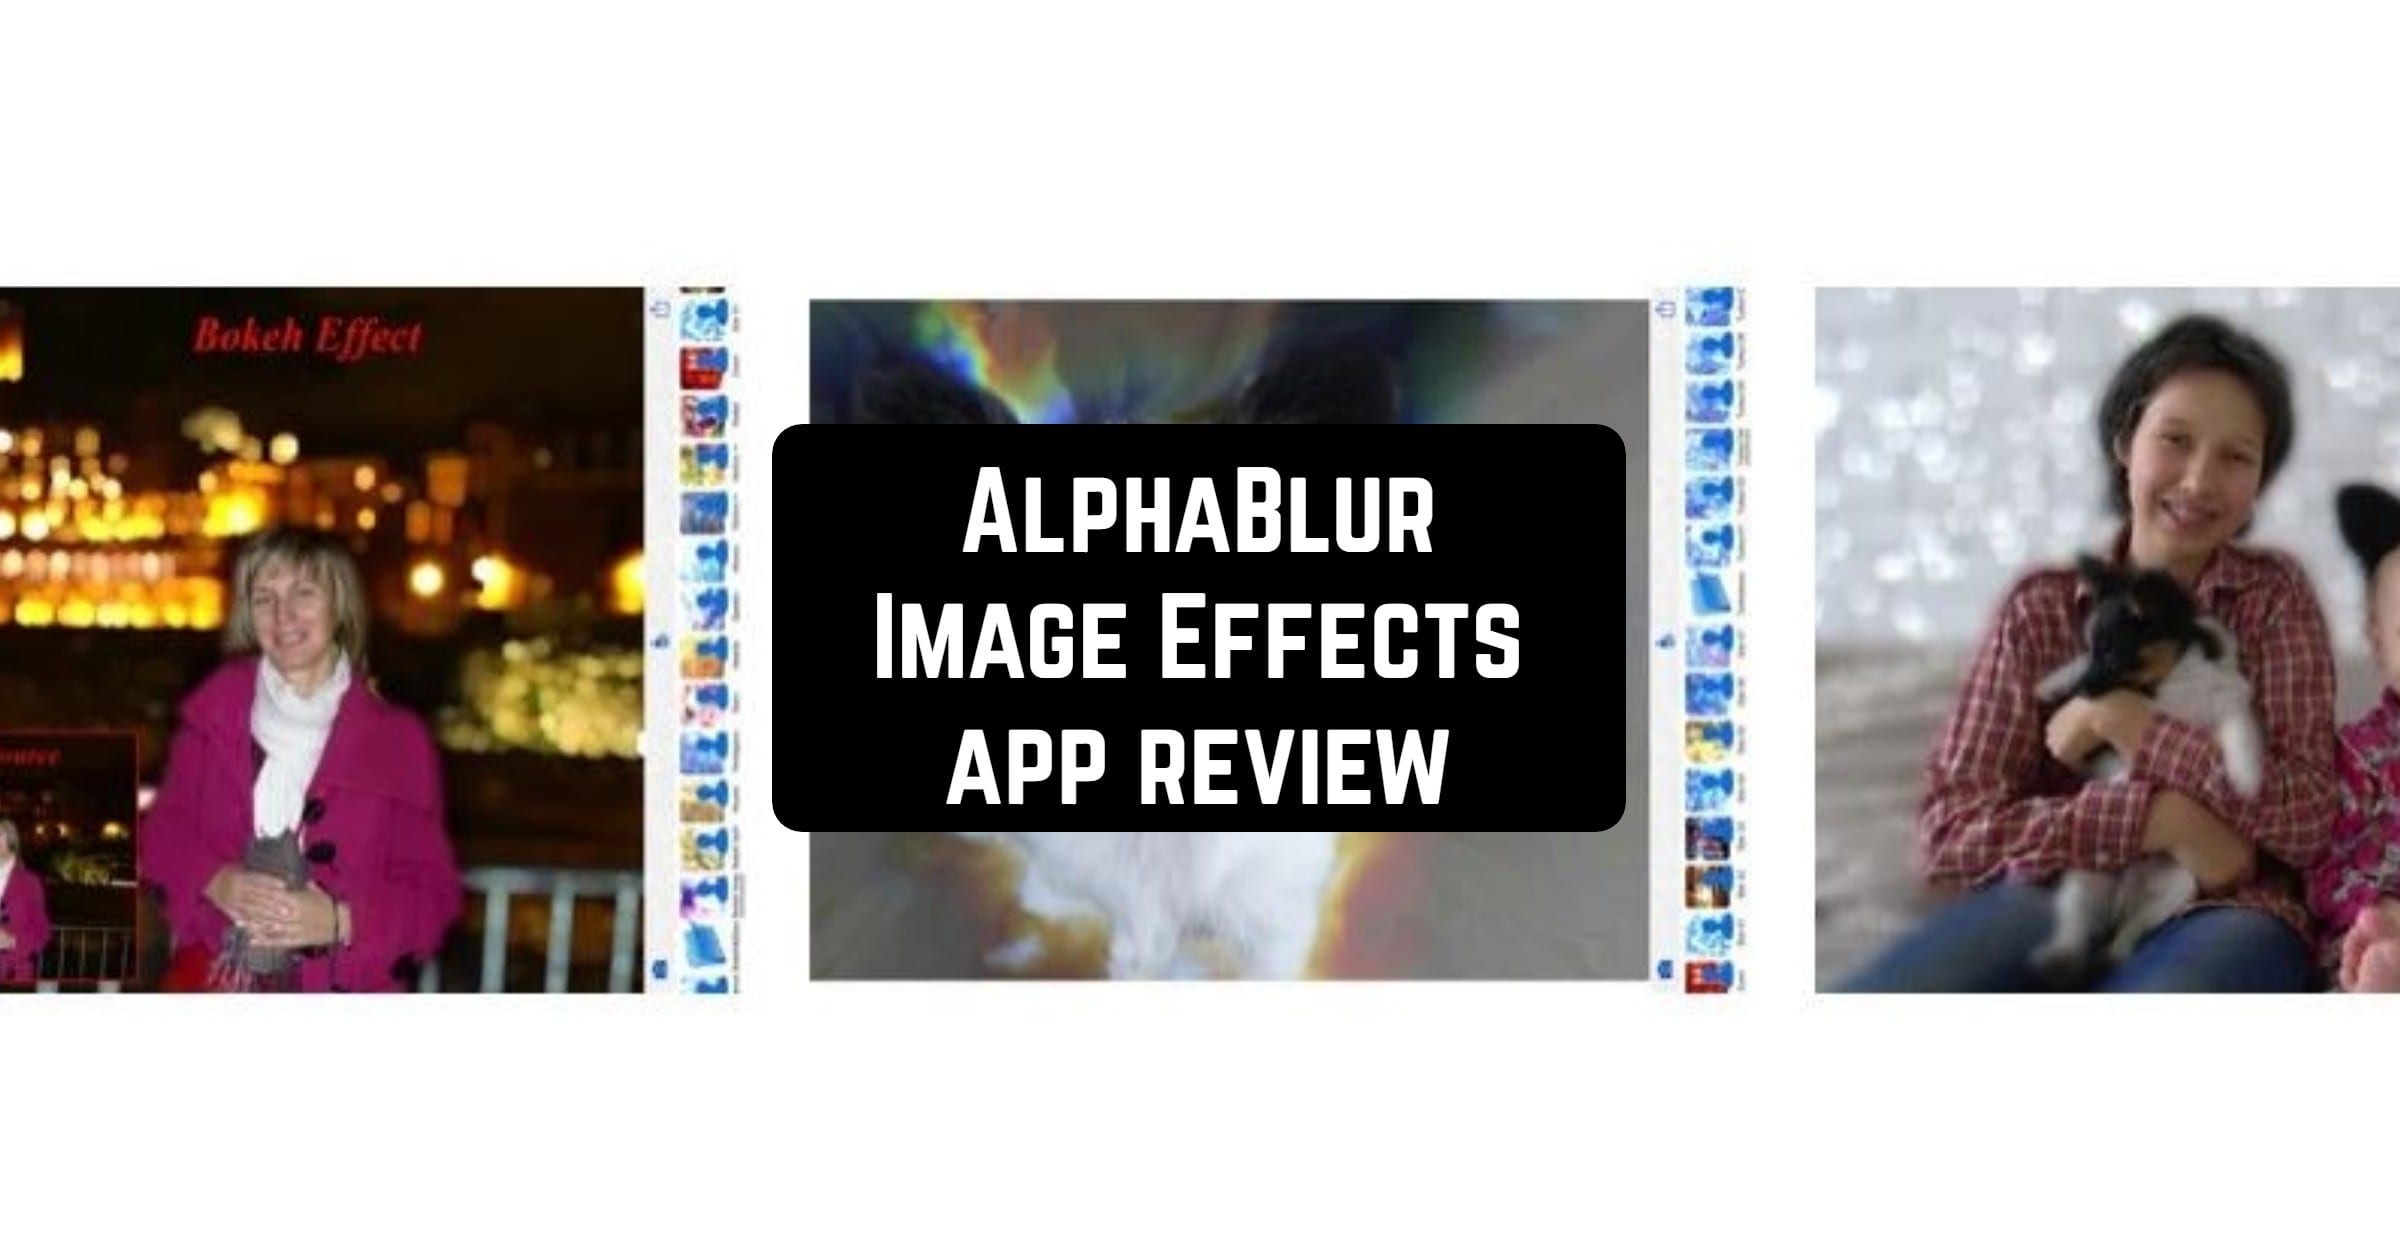 AlphaBlur Image Effects App Review - App pearl - Best mobile apps for Android & iOS devices